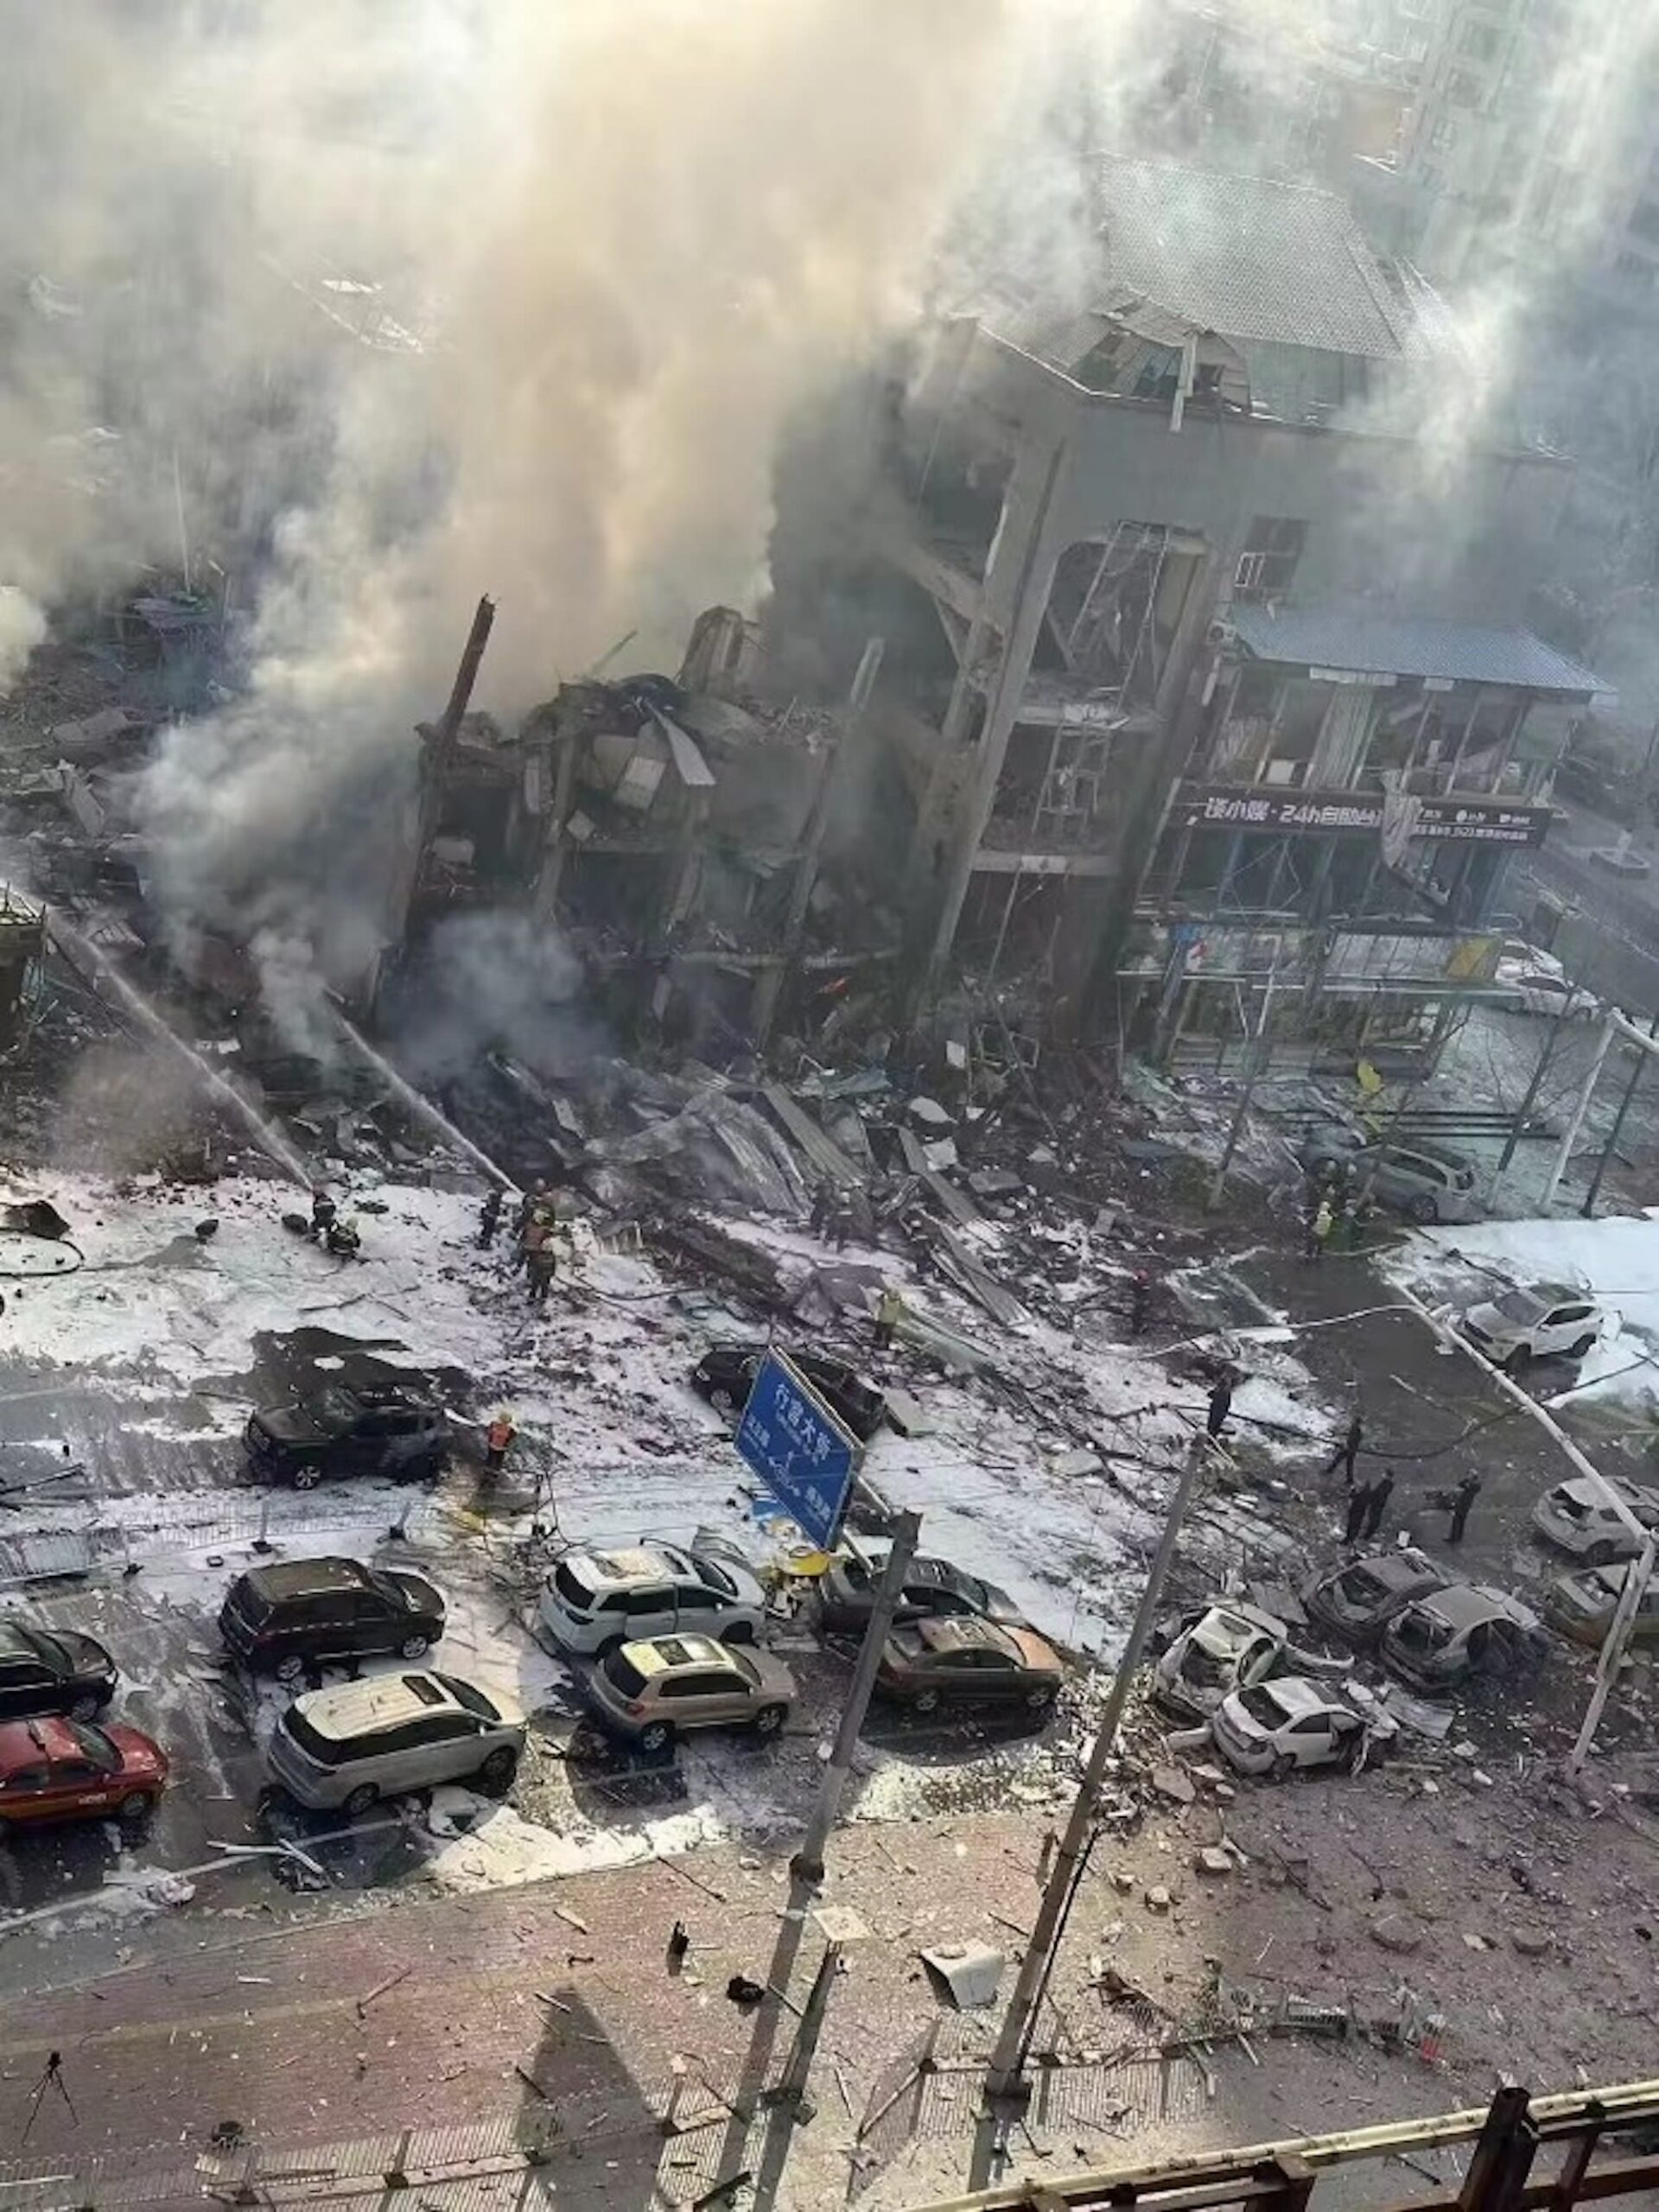 The blast ripped through a four-story building, state media said.